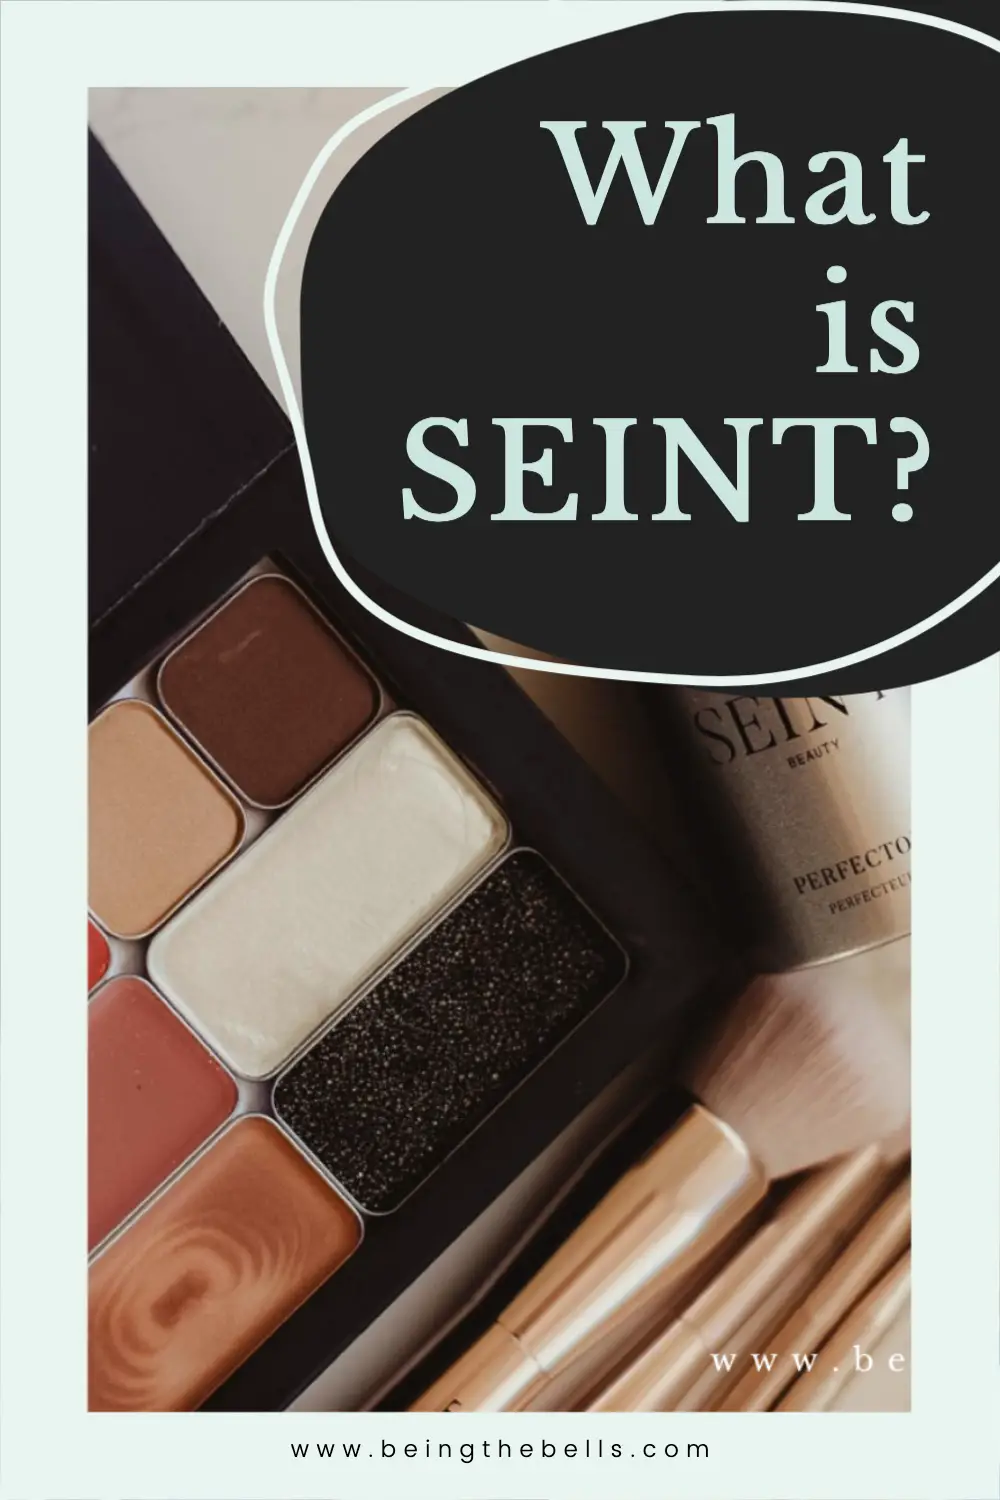 What is Seint?